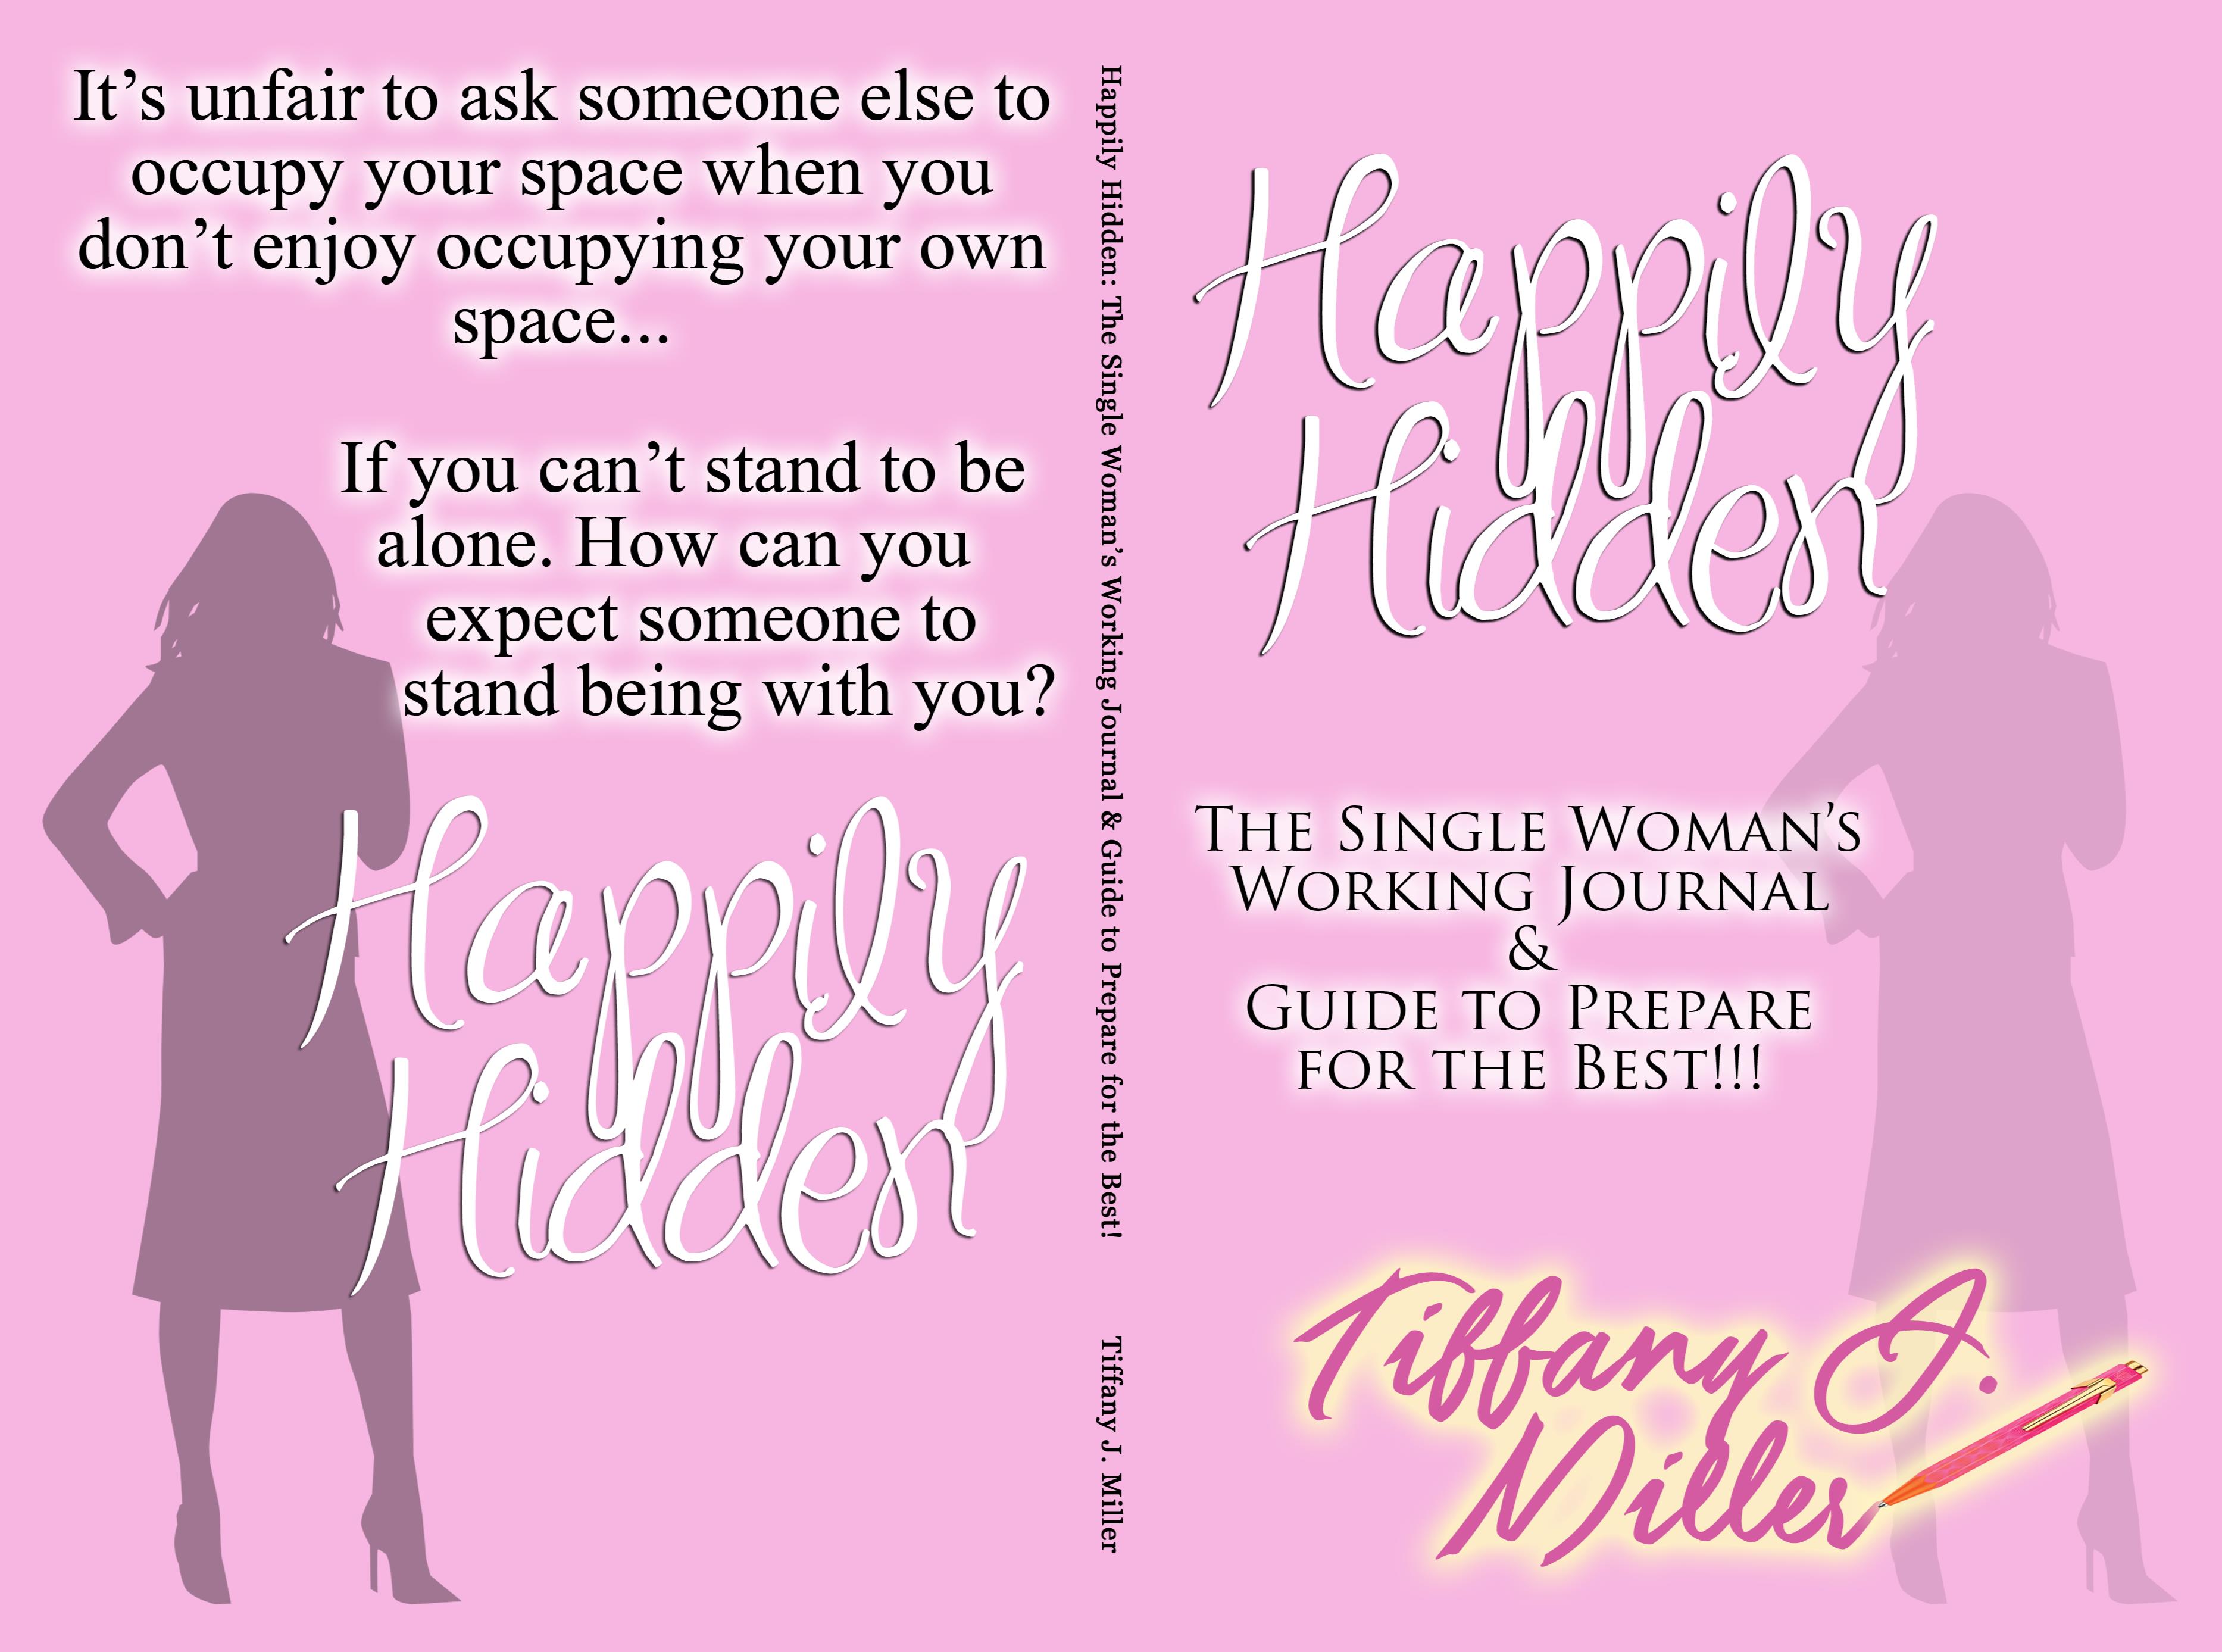 Happily Hidden cover image